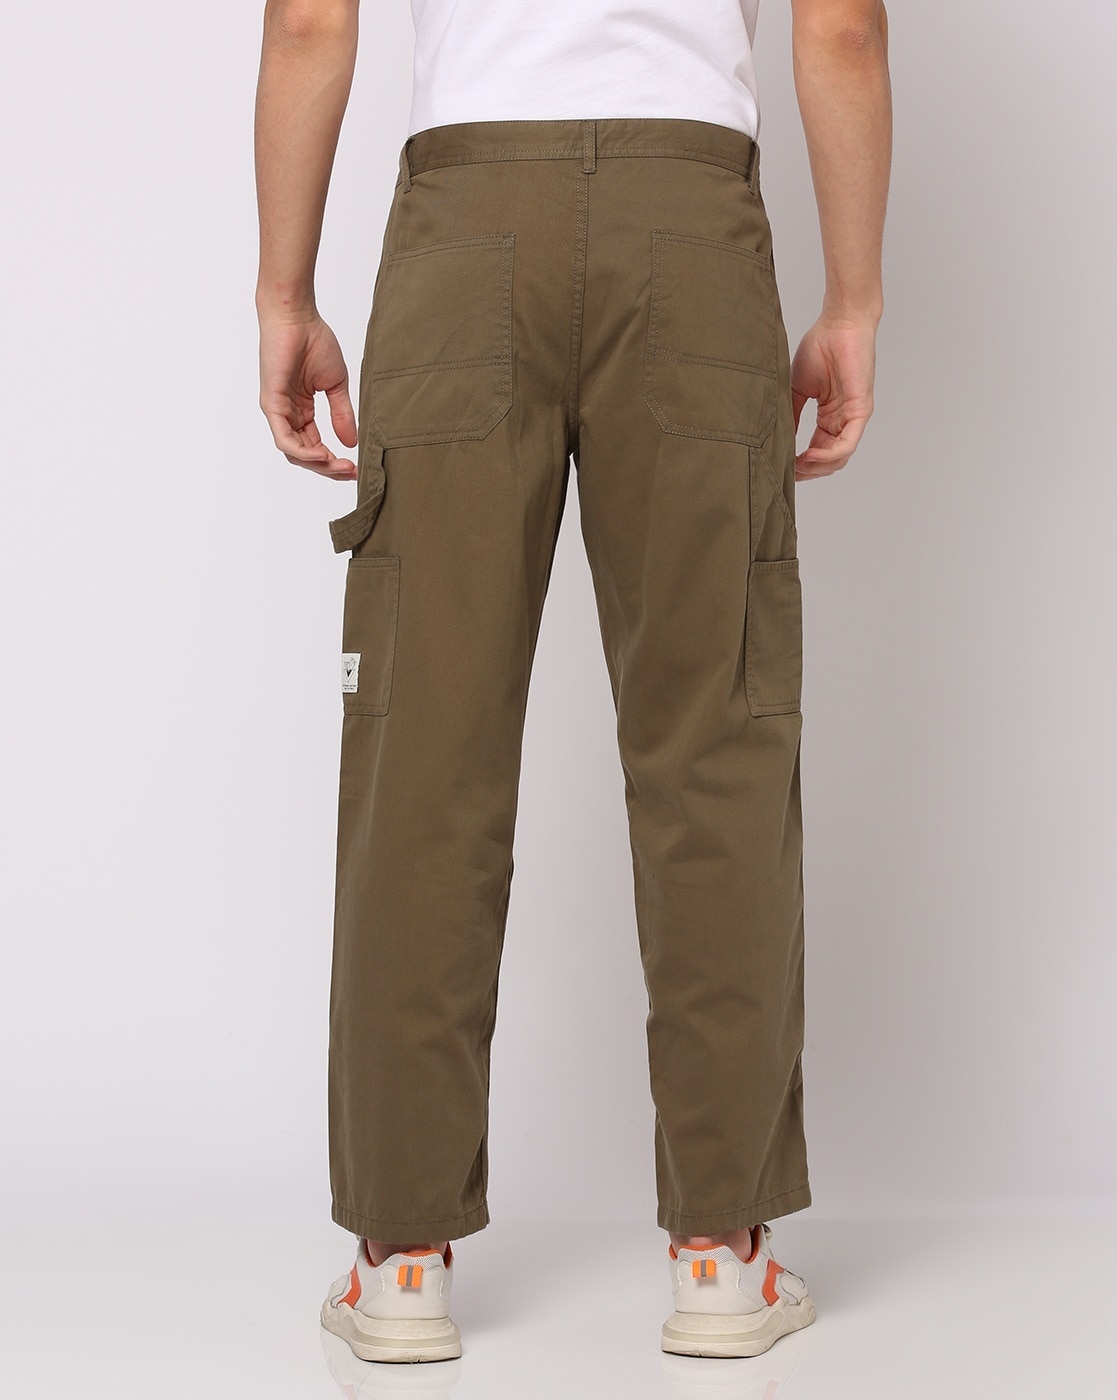 Buy Olive Green Trousers & Pants for Men by DNMX Online